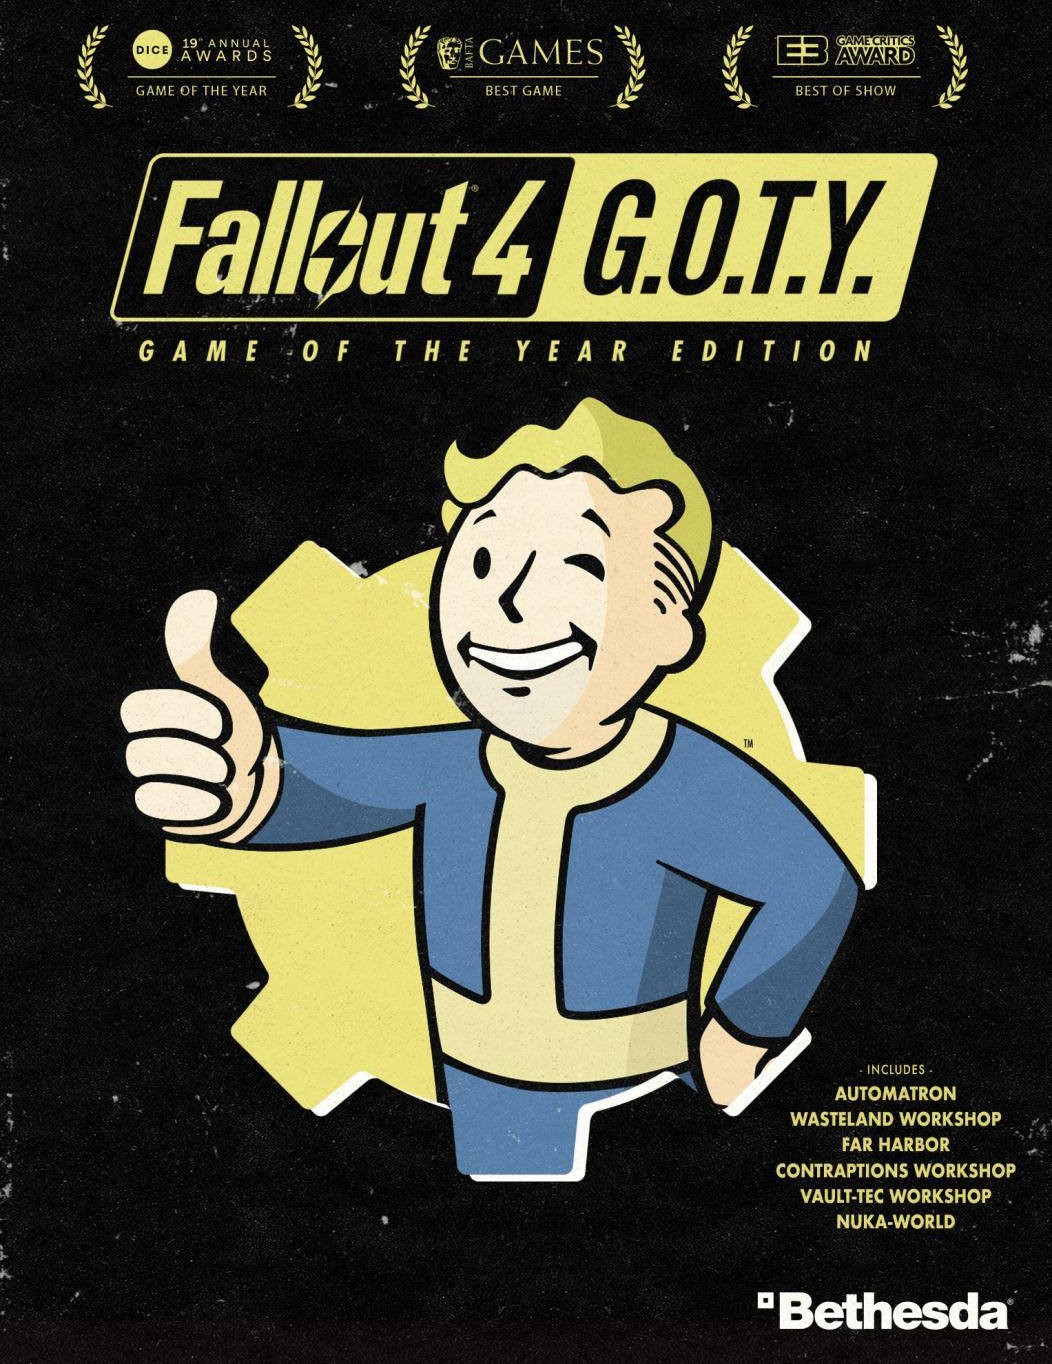 Картинка Fallout 4 G.O.T.Y. Edition для PS